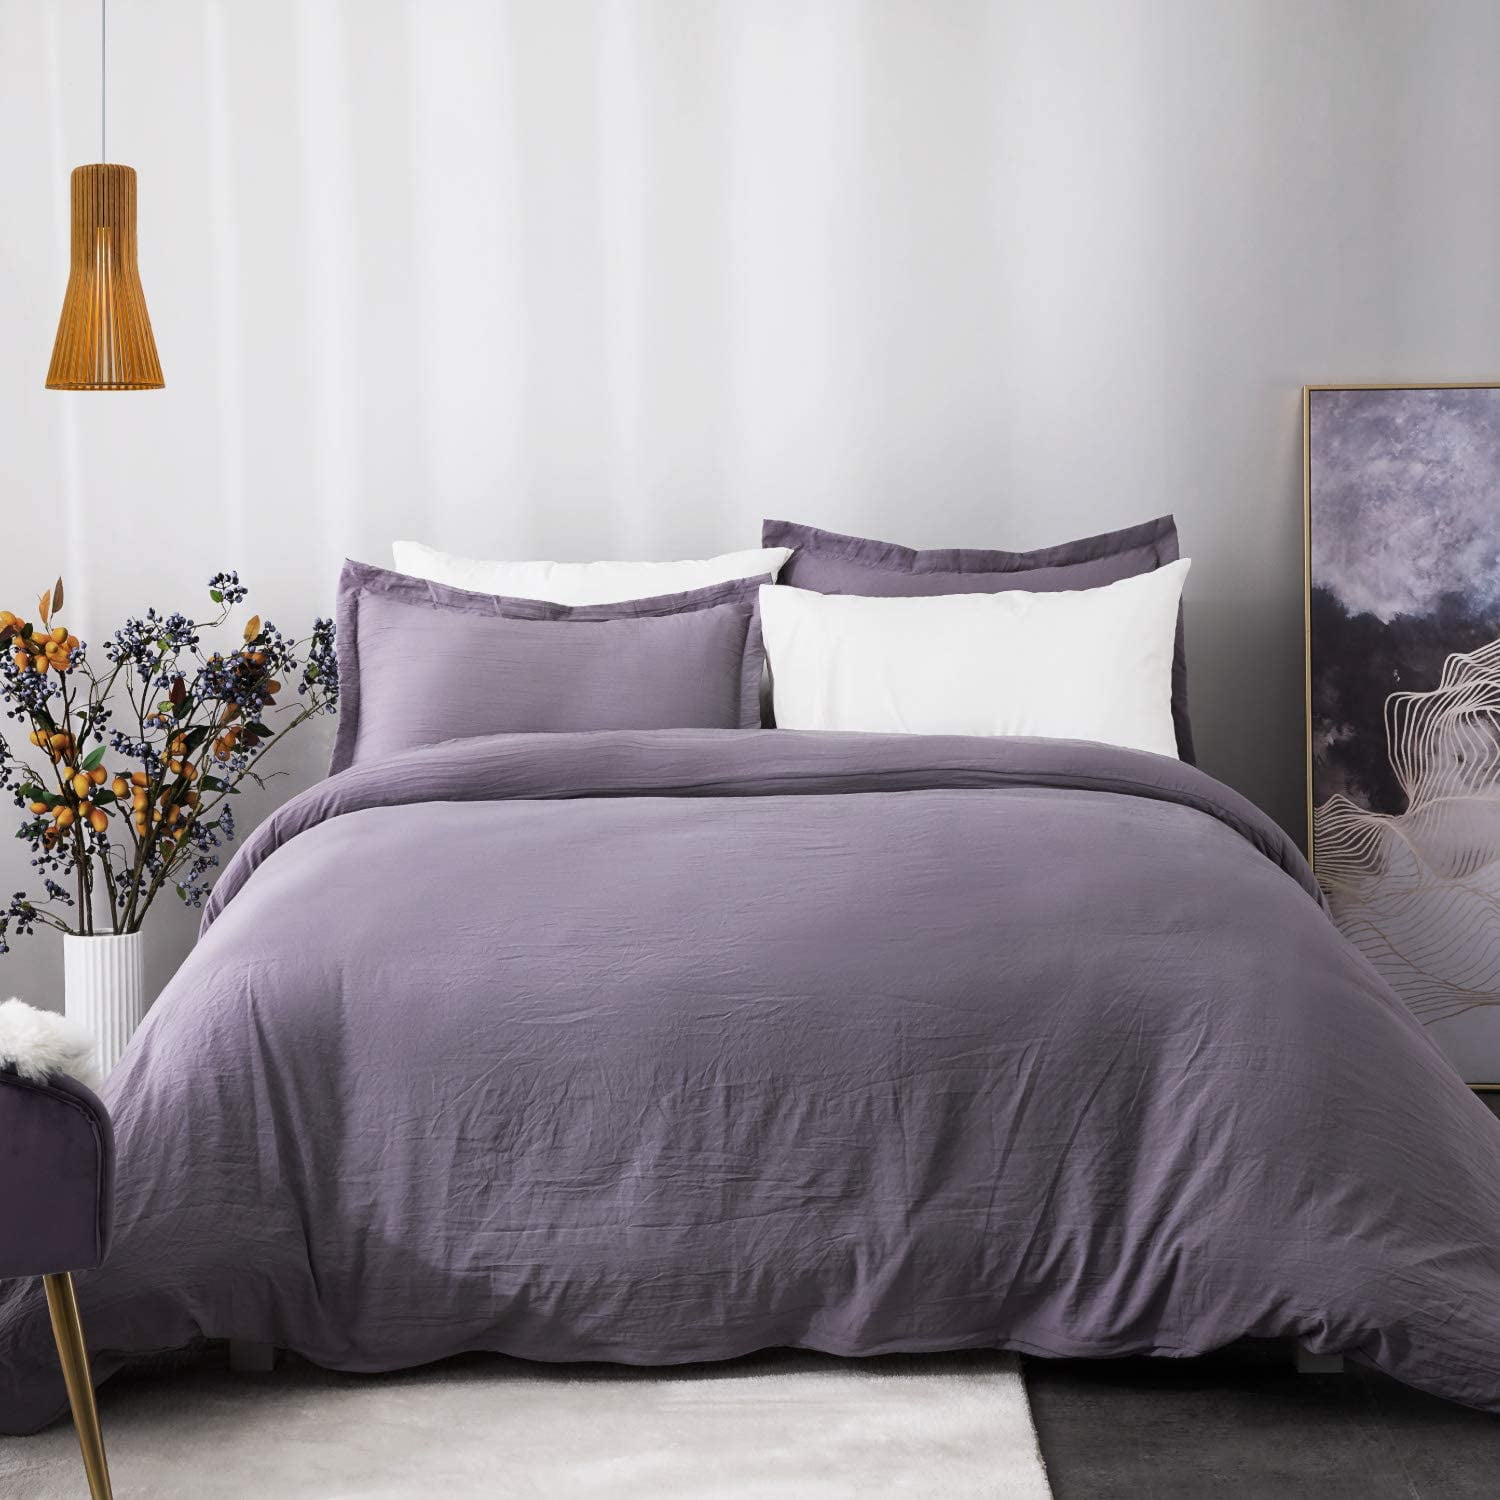 Details about   Purple Bed Sheet 100% Cotton Flat Sheet Pillowcase Cover For Home Dressing 